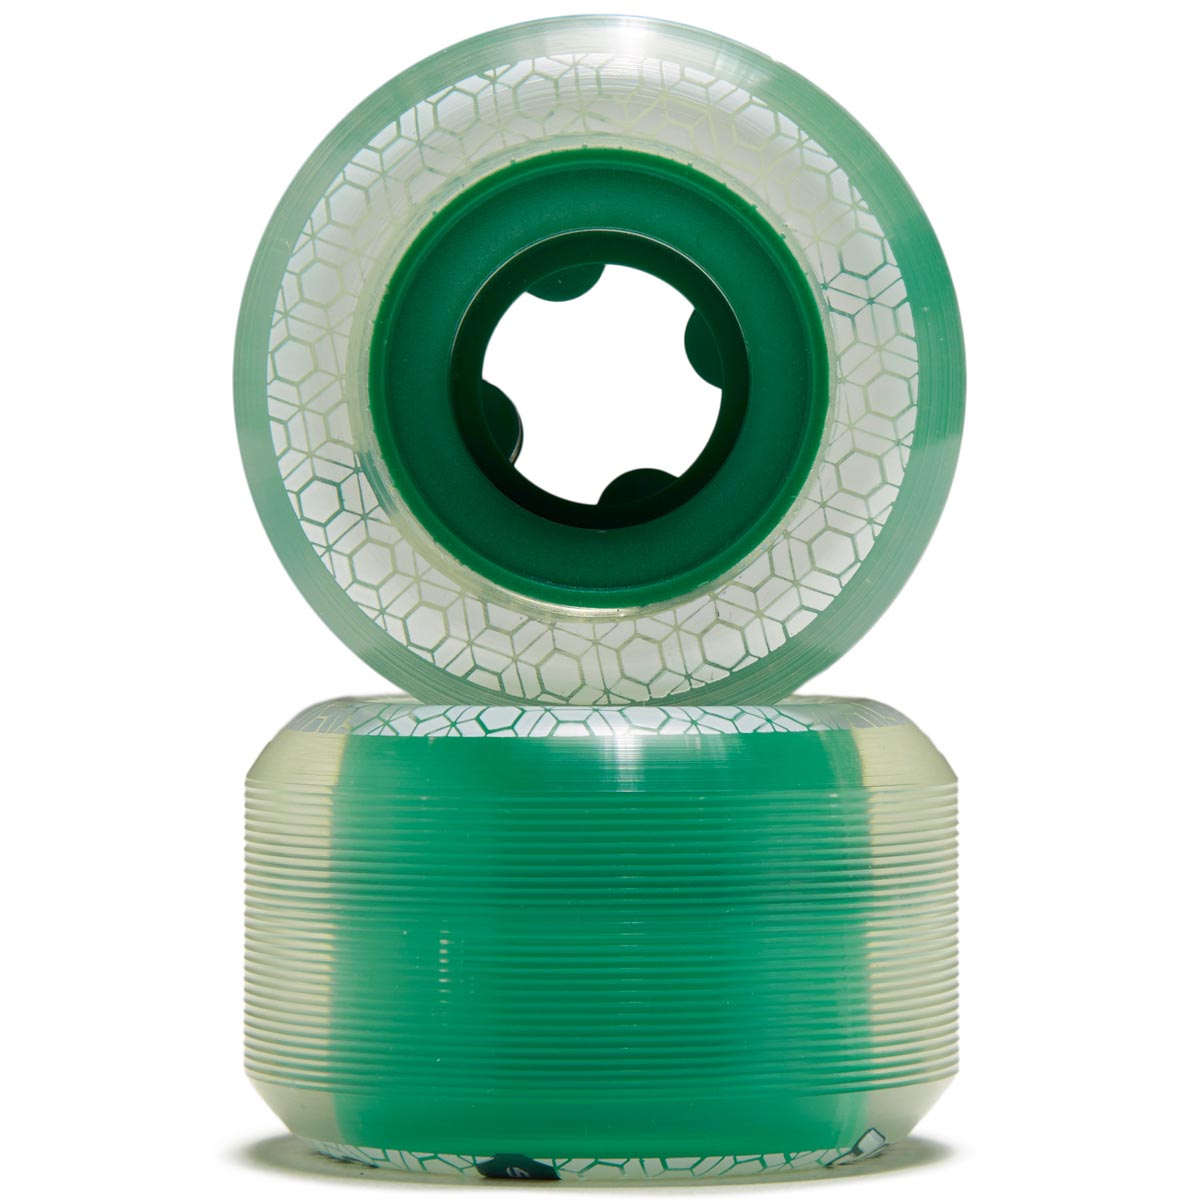 Ricta Crystal Cores Wide 95a Skateboard Wheels - Clear - 54mm image 2